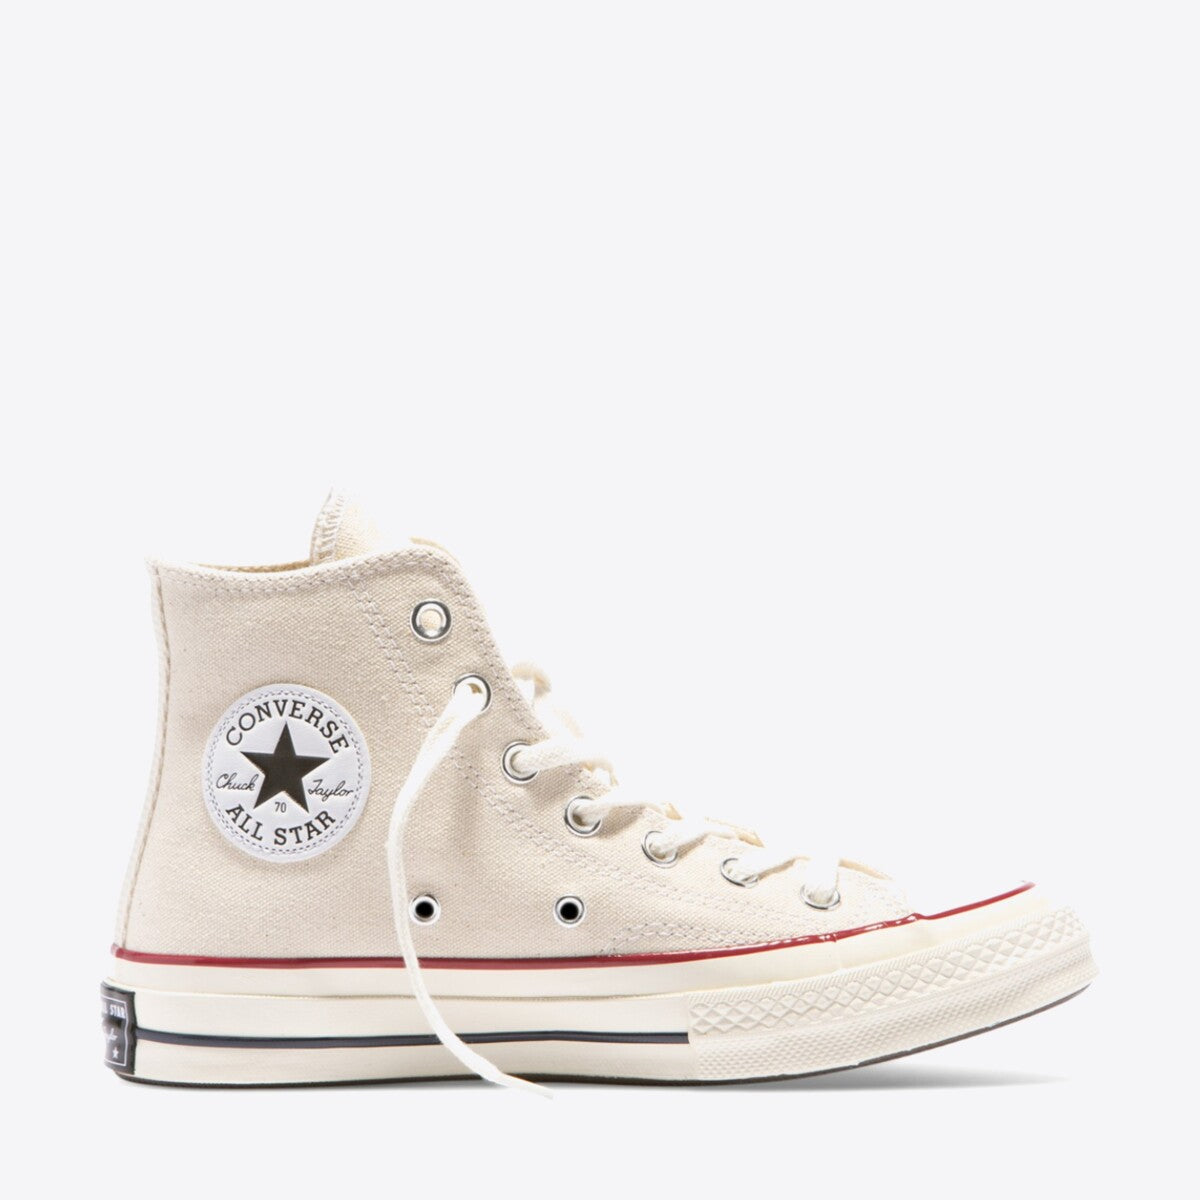 CONVERSE Chuck Taylor All Star 70 Canvas High Parchment - Image 2